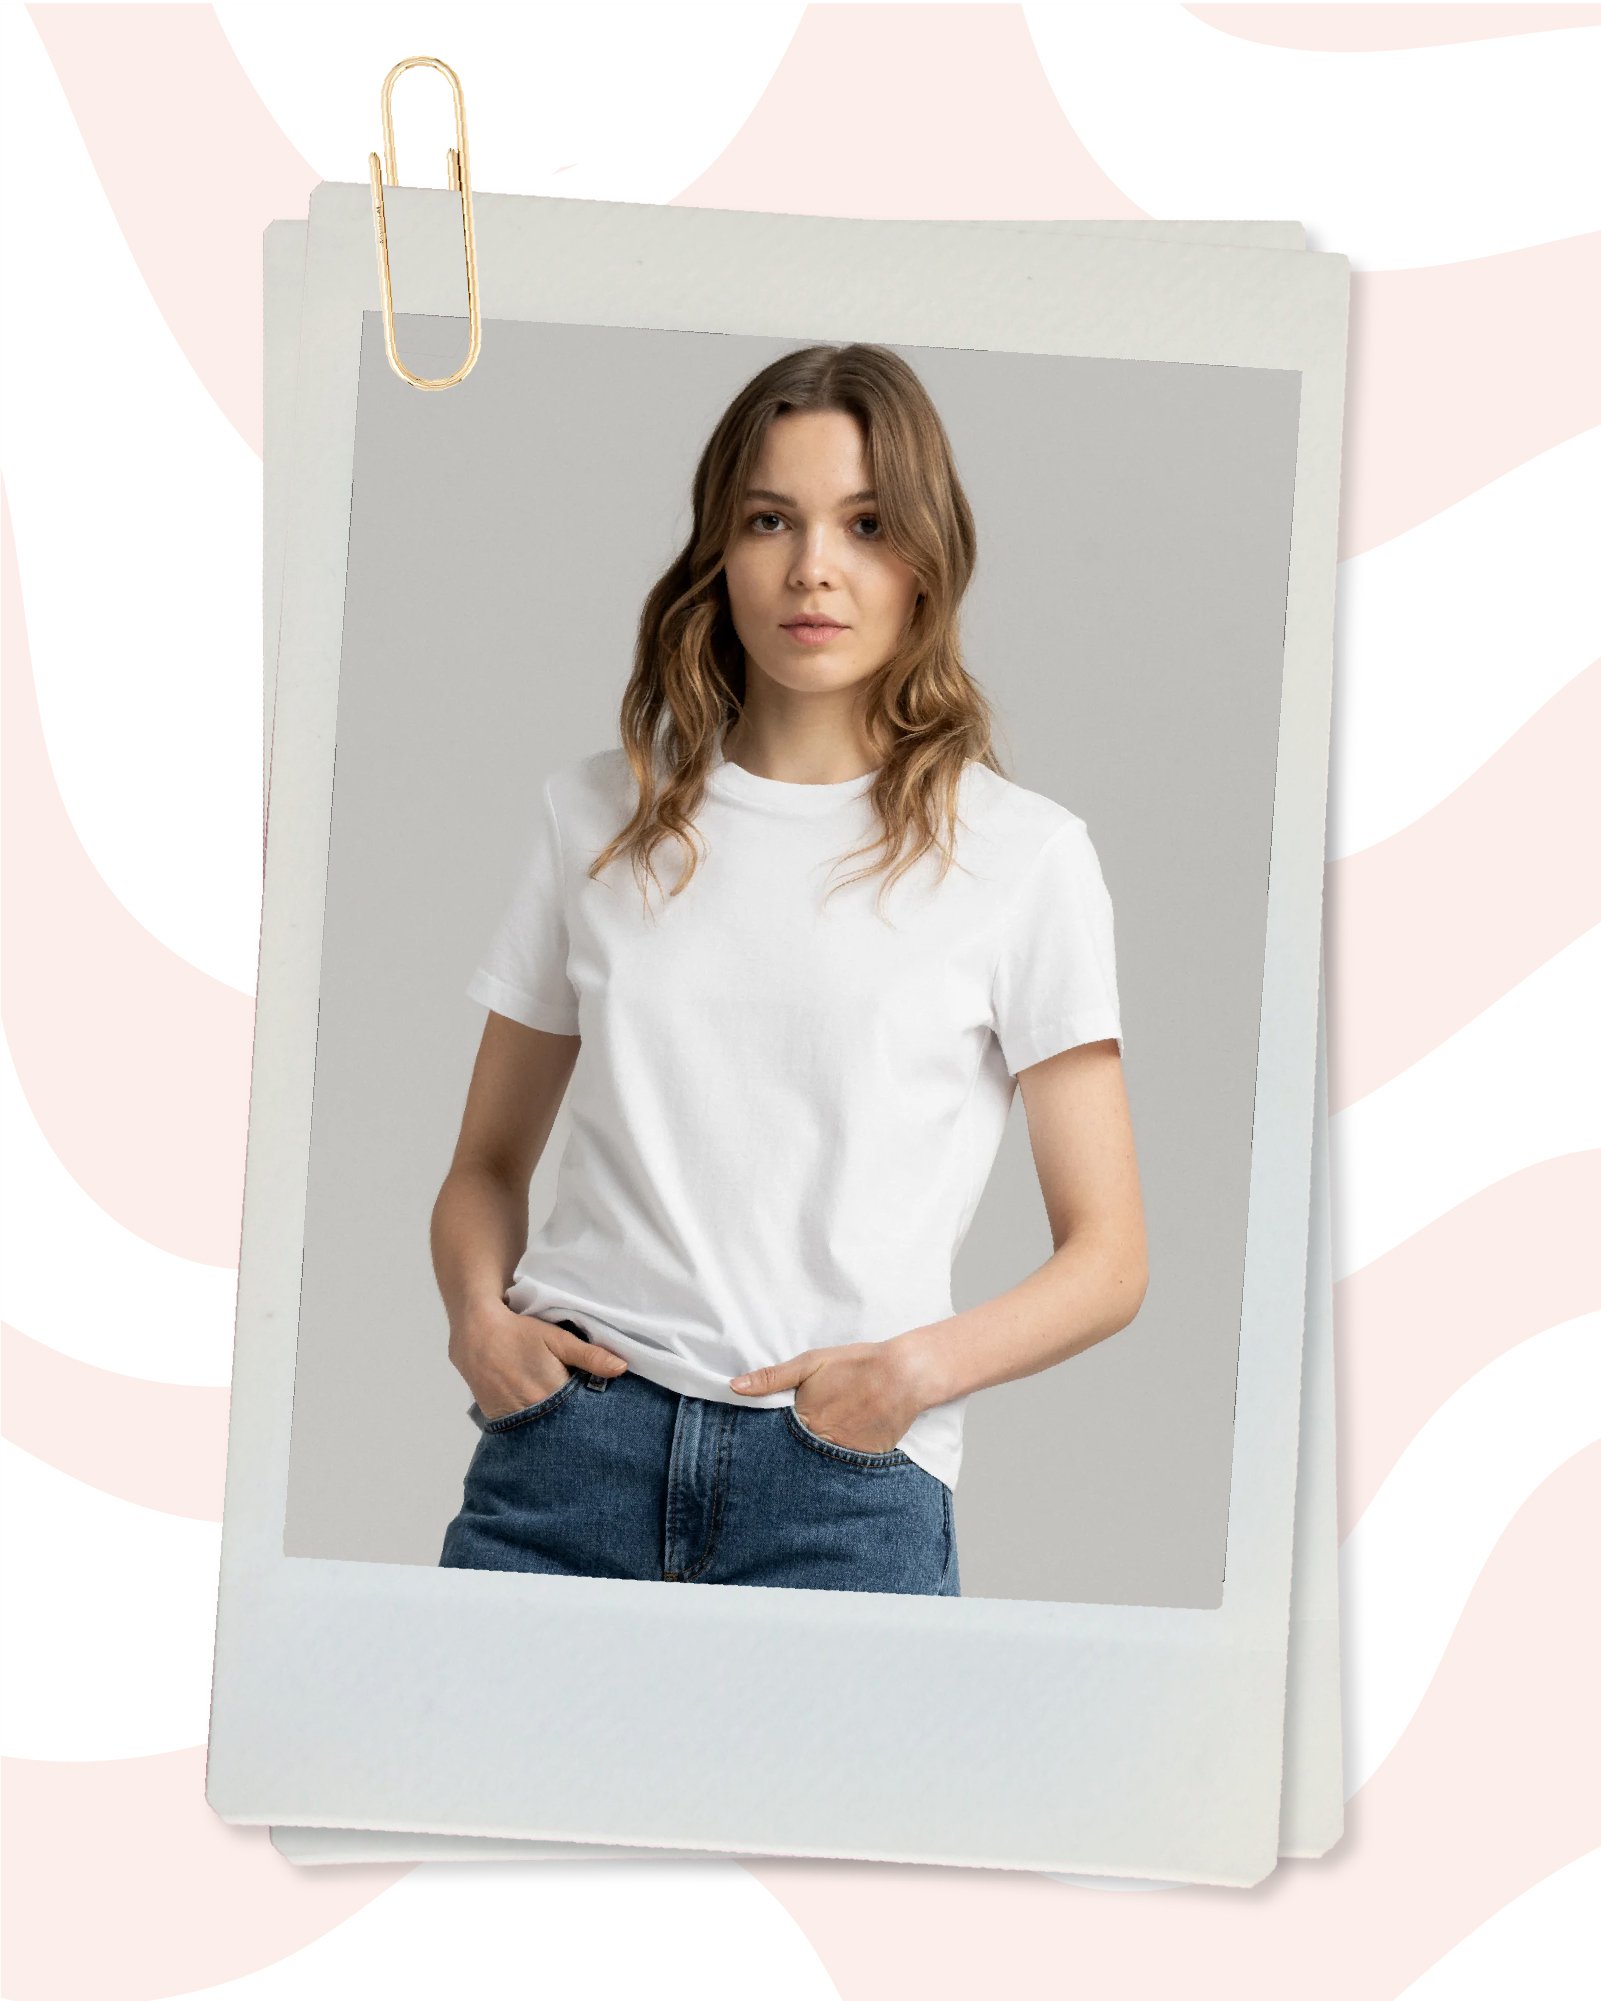 The ASKET T-Shirt Is a High Quality, Affordable White Tee With 15